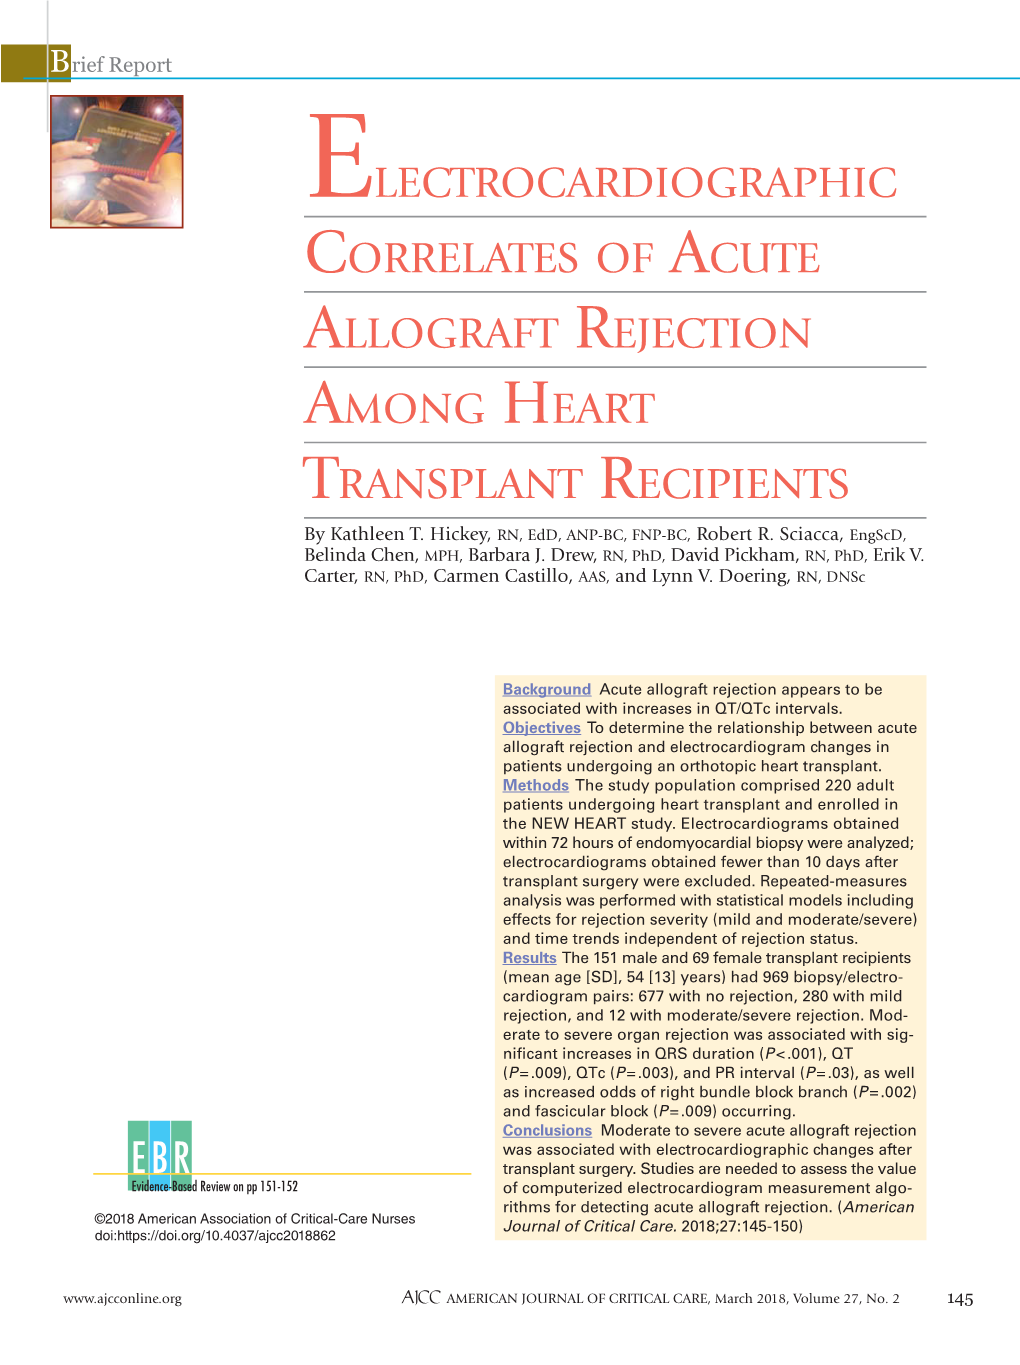 Electrocardiographic Correlates of Acute Allograft Rejection Among Heart Transplant Recipients